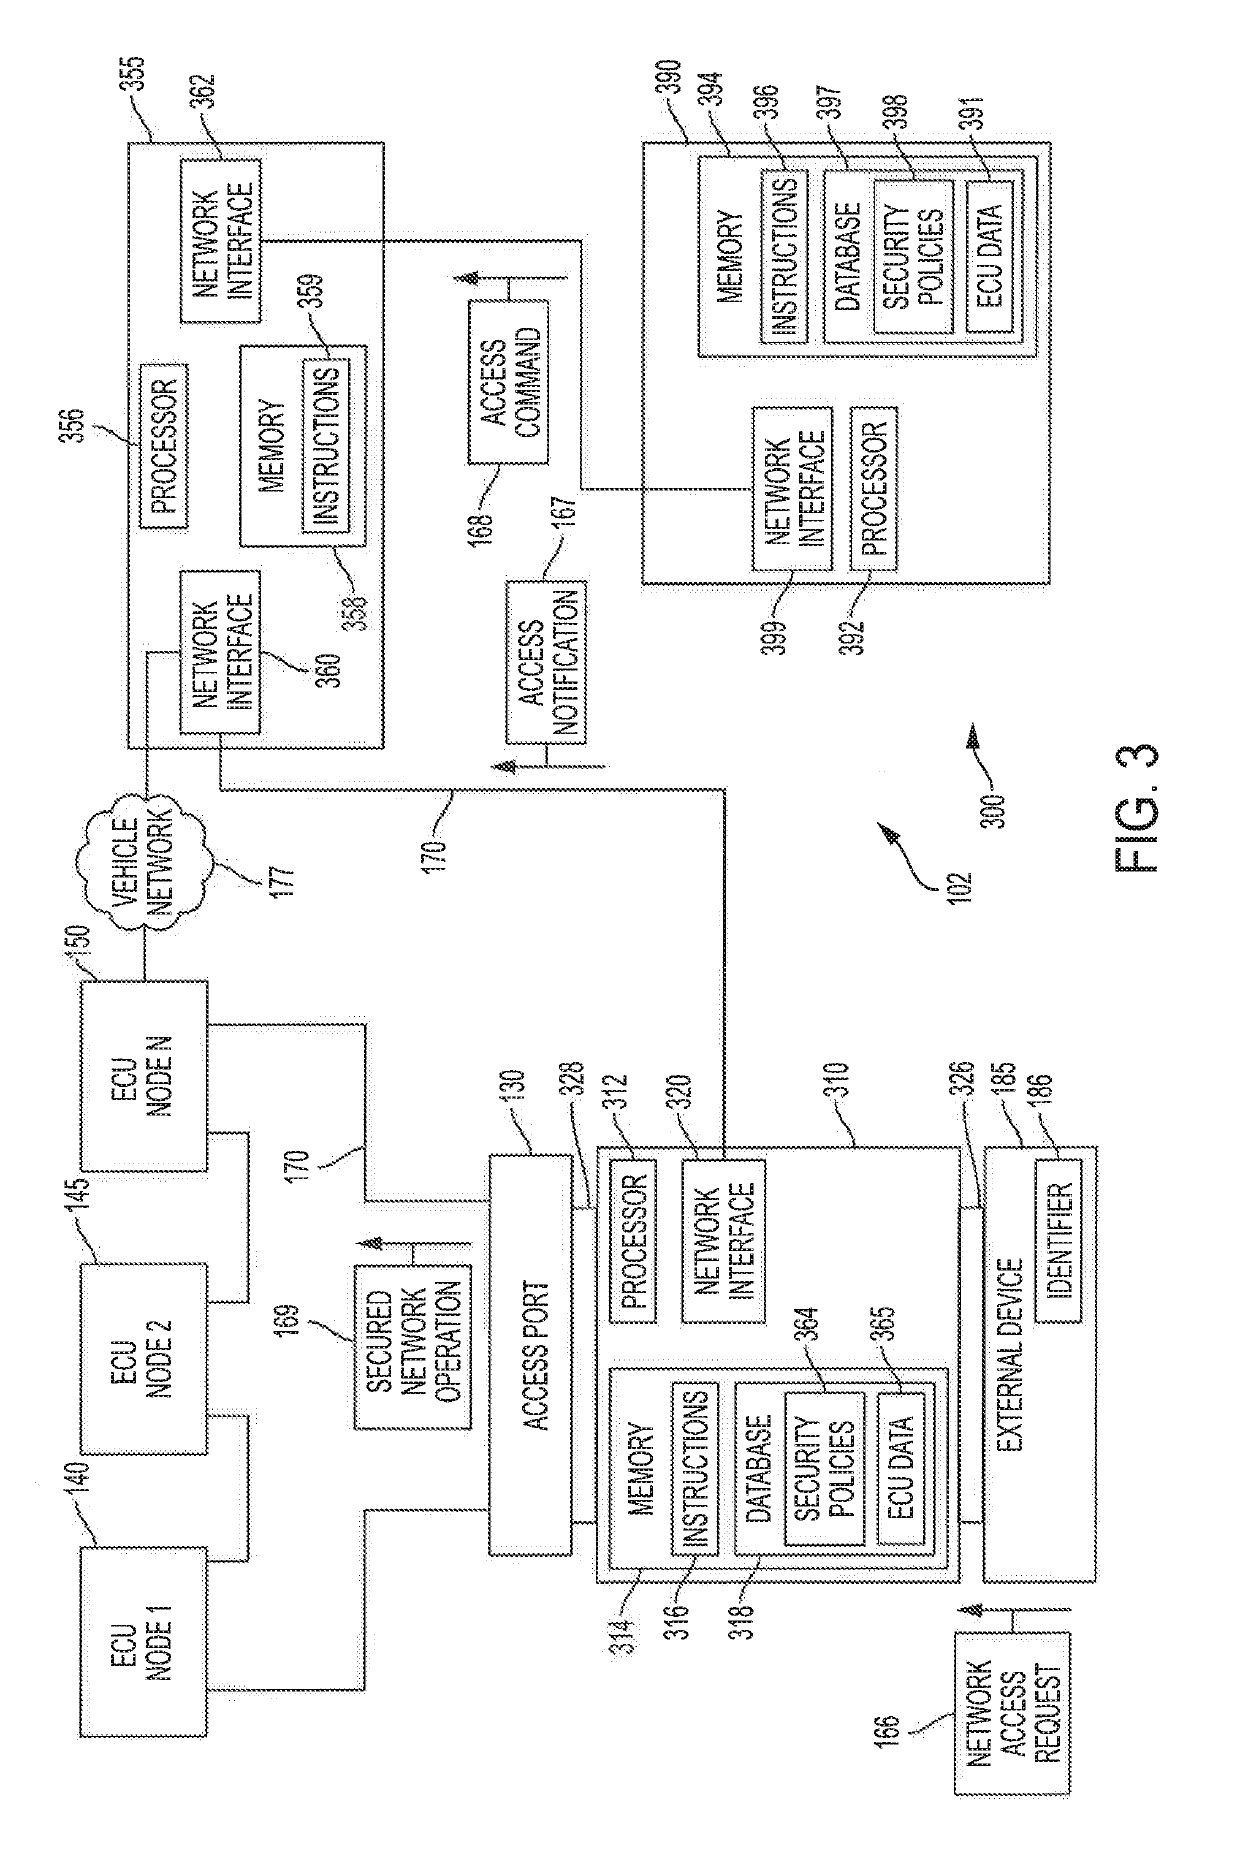 Systems and methods for securing an automotive controller network